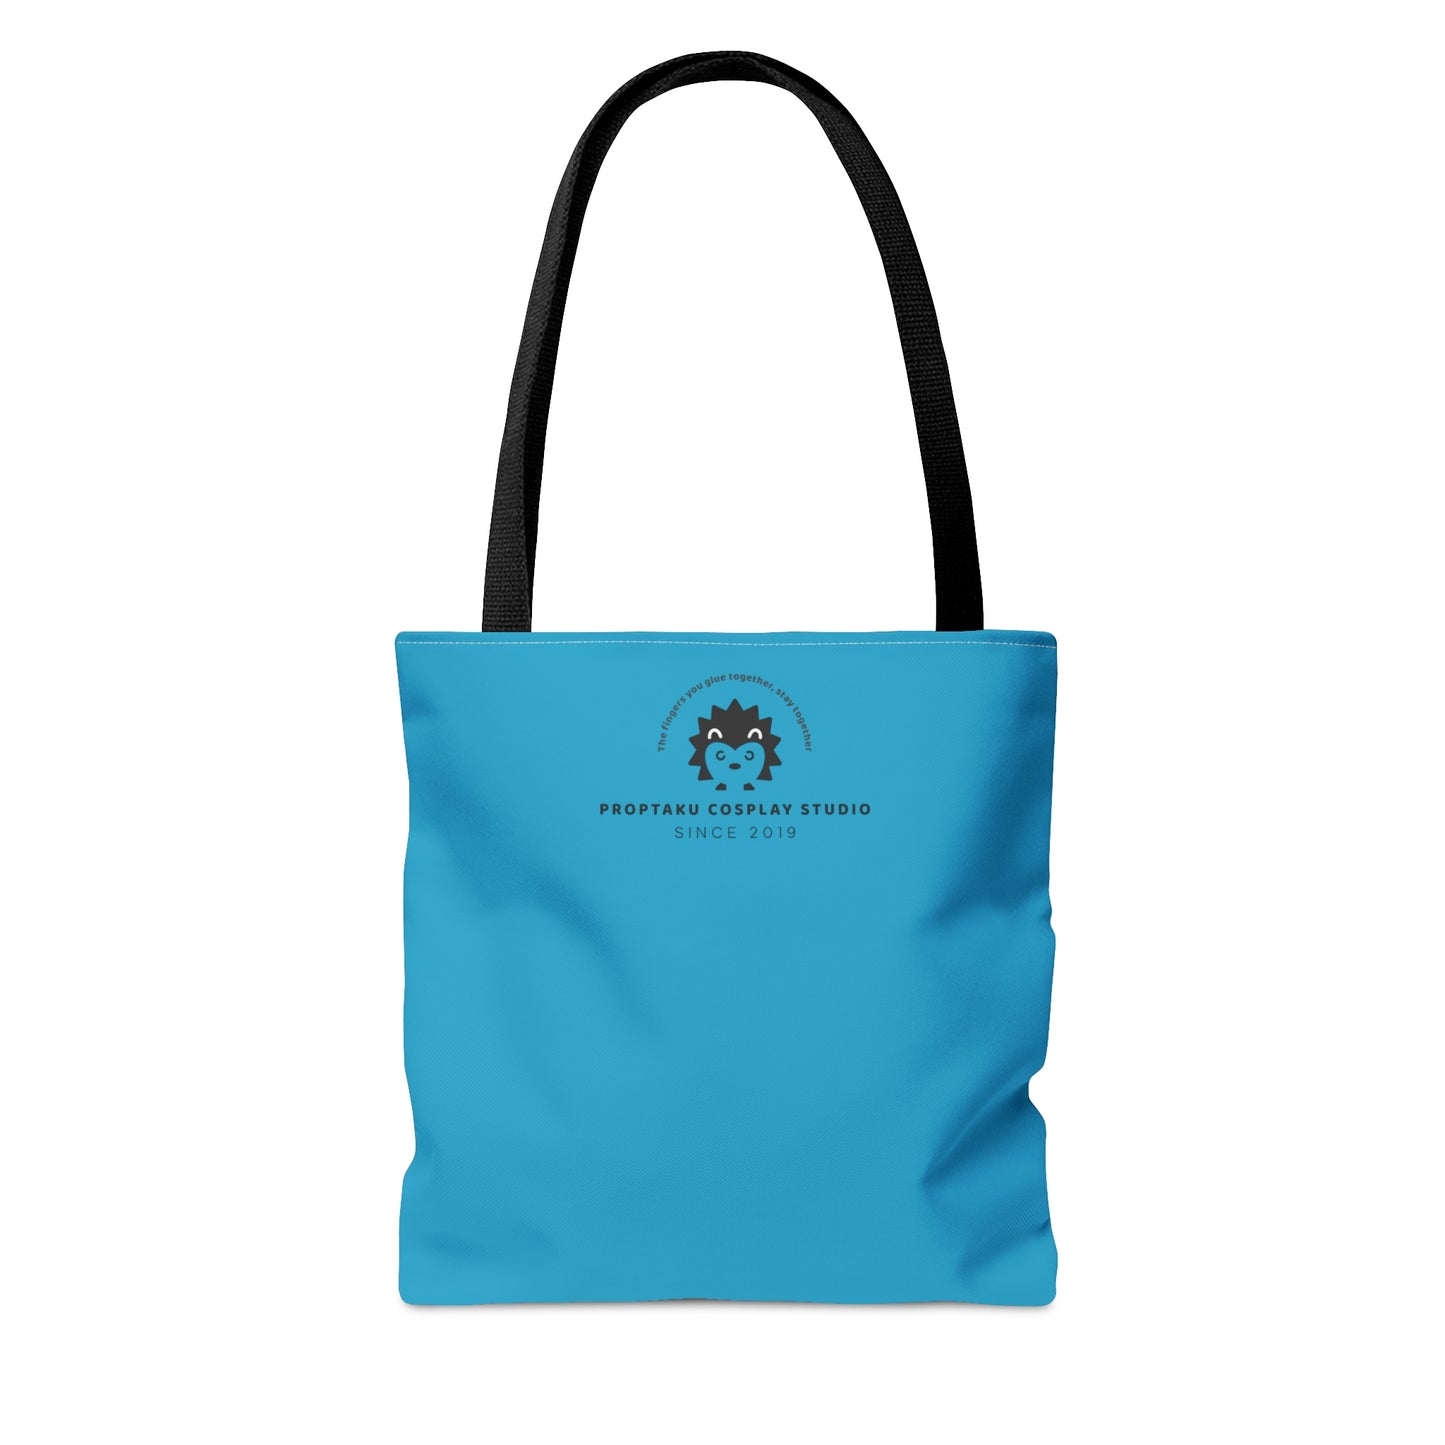 After-Con "Take Off Your Mask" Tote Bag